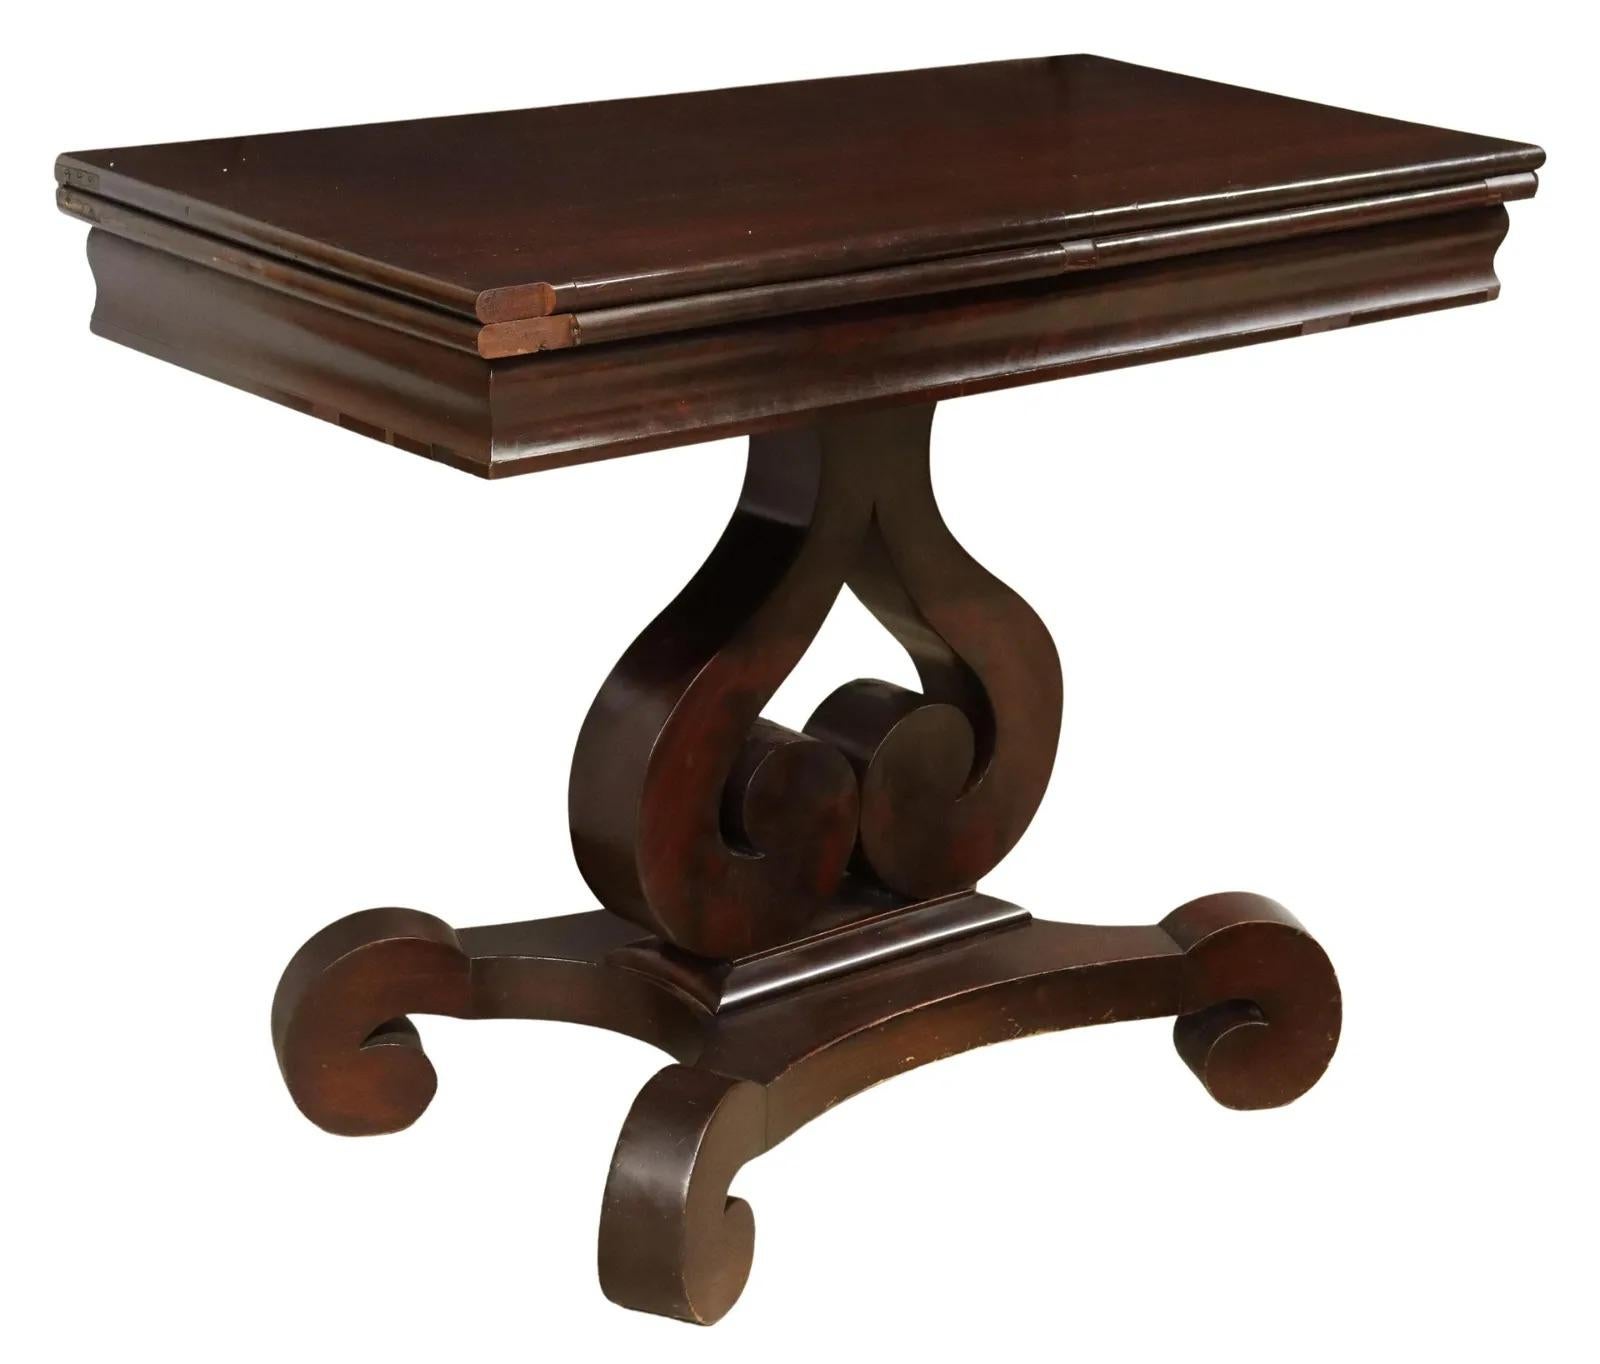 19th Century Antique American Empire Period Mahogany Games Table For Sale